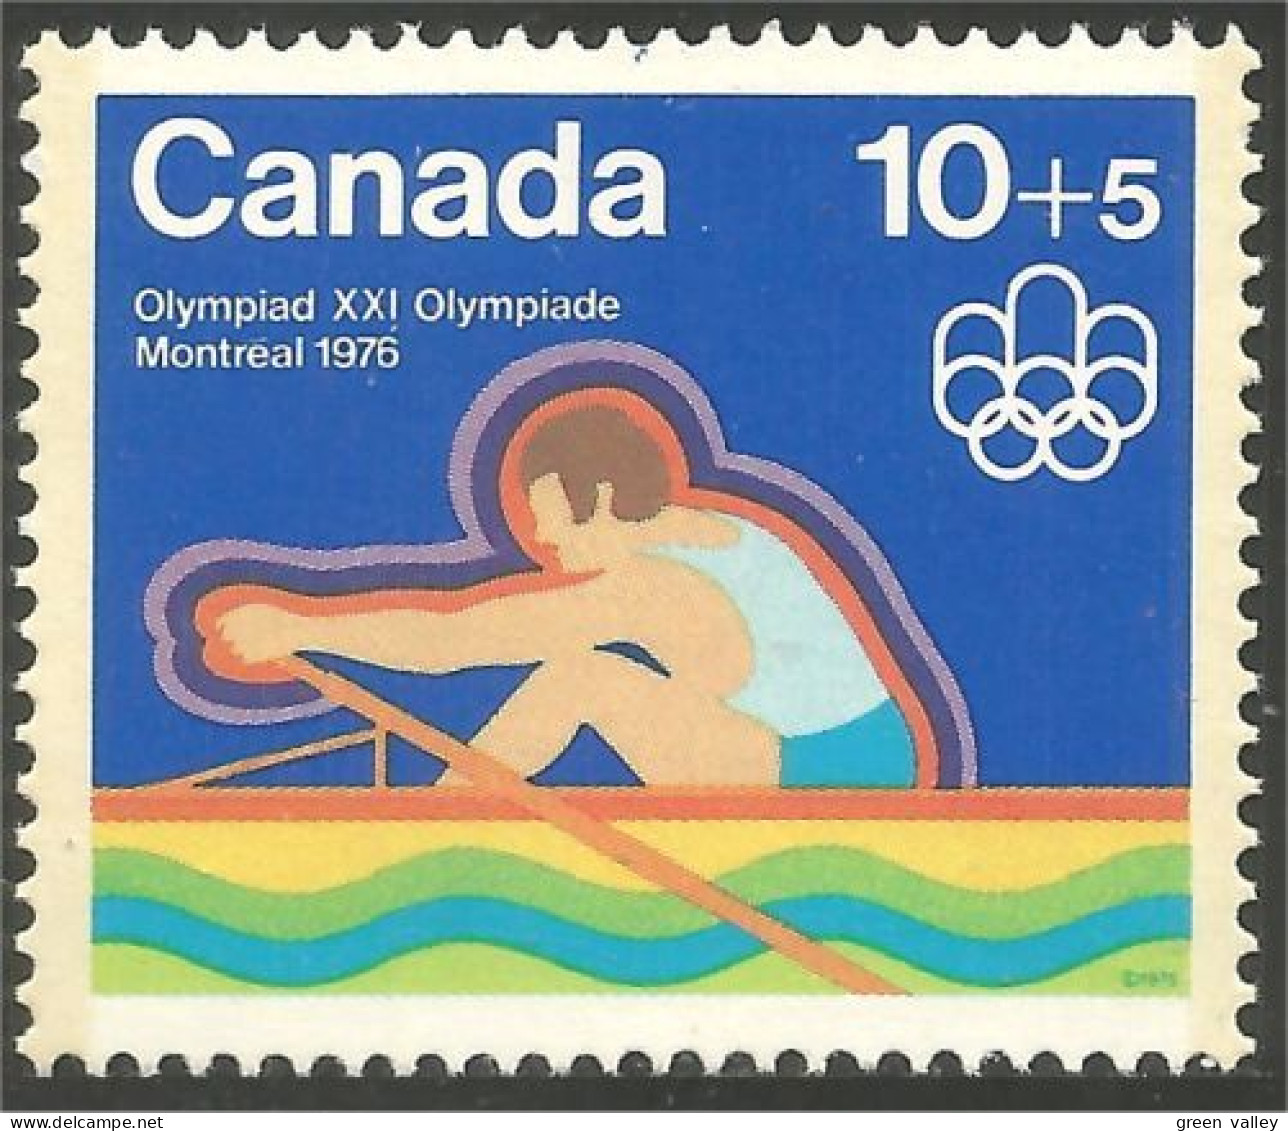 Canada 10c+5c Aviron Rowing Jeux Olympiques Montreal 1976 Olympic Games MNH ** Neuf SC (CB-05c) - Summer 1976: Montreal